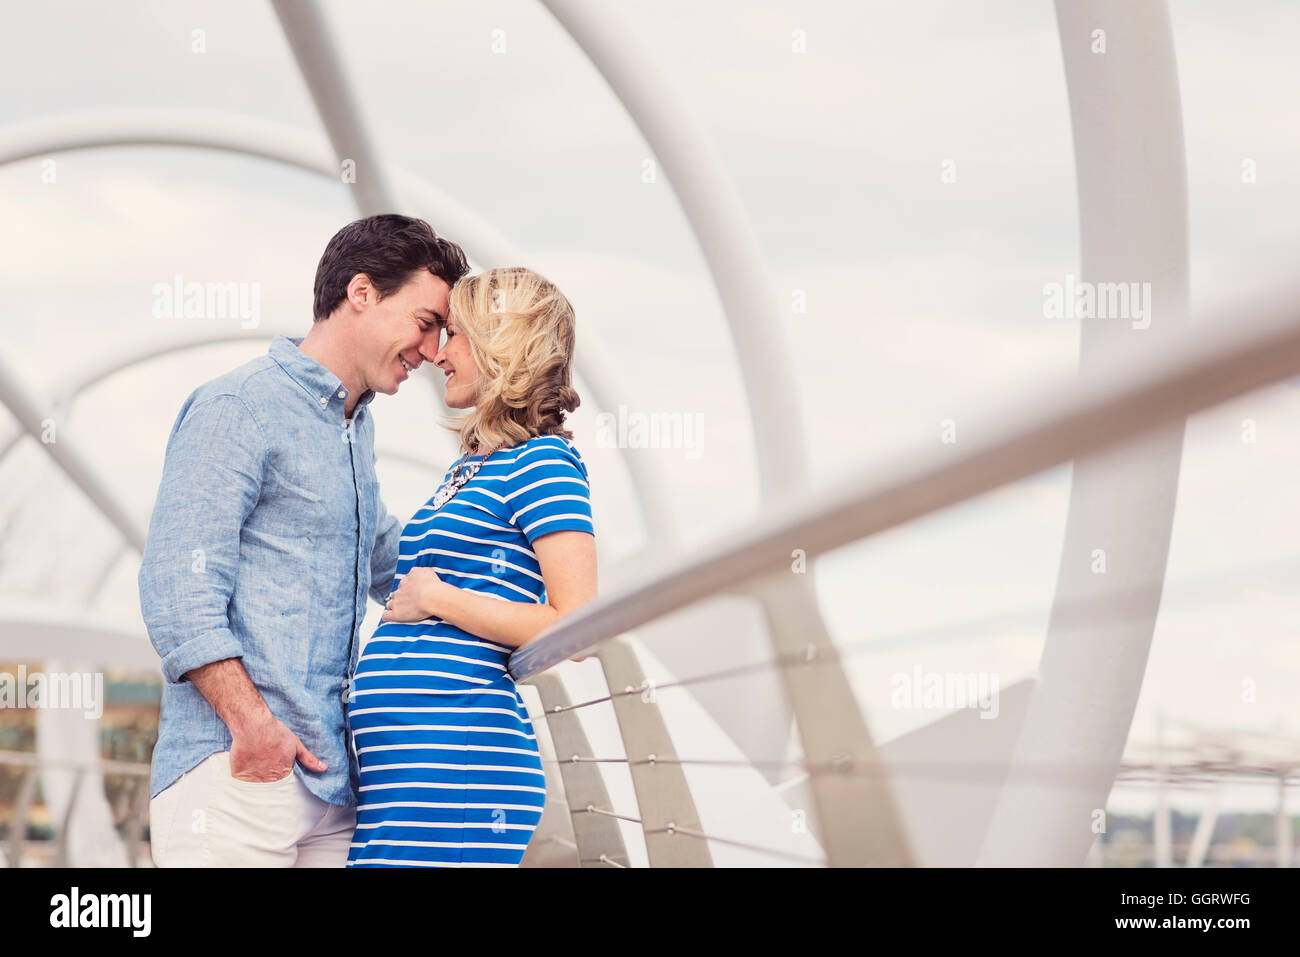 Smiling Caucasian man and expectant mother rubbing noses on walkway Stock Photo